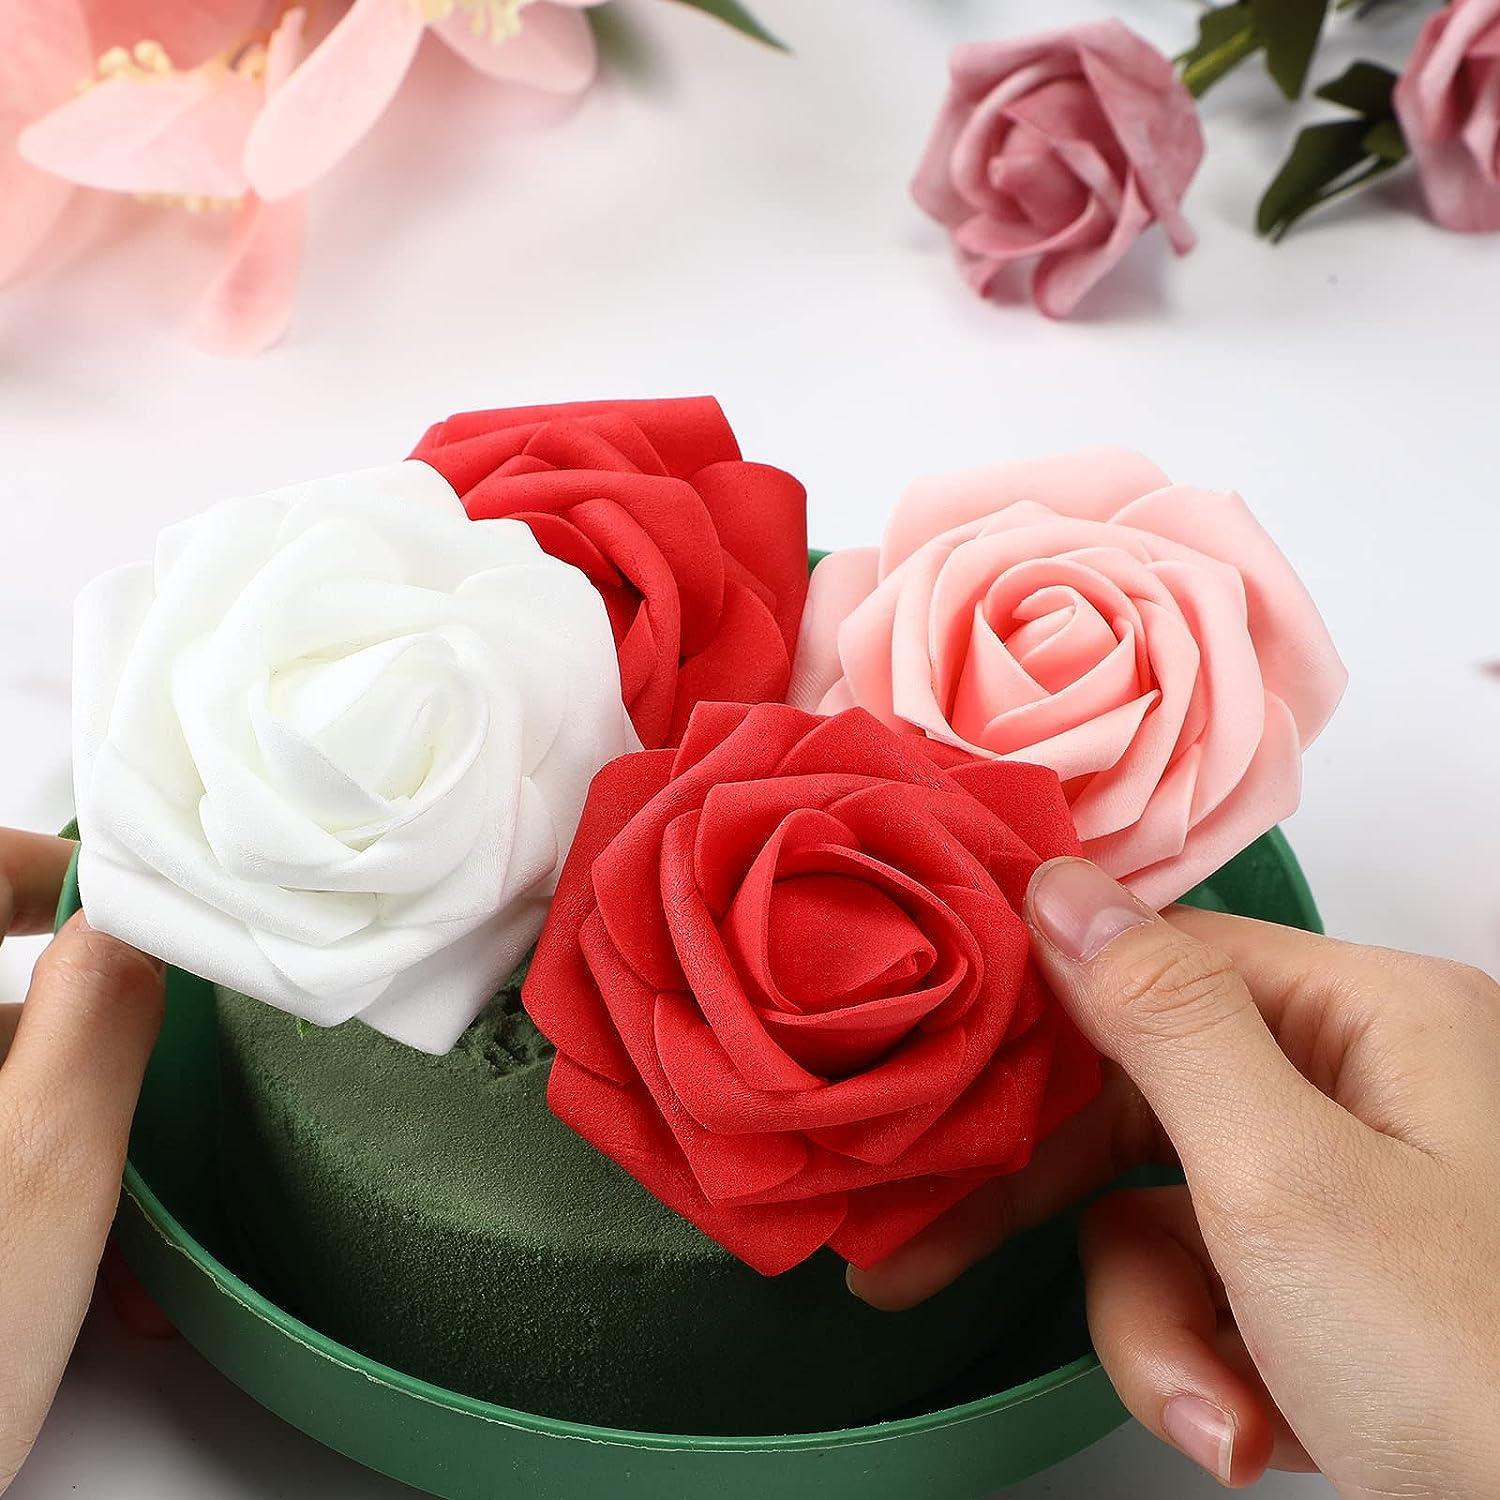 Perthlin 12 Pieces DIY Flower Foam with Bowl Kit 6.5 Inch Large Size Round  Floral Foam Blocks Green DIY Flower Arrangement Kit Floral Flower Arranging  Supplies for Wedding Birthday Party Decoration